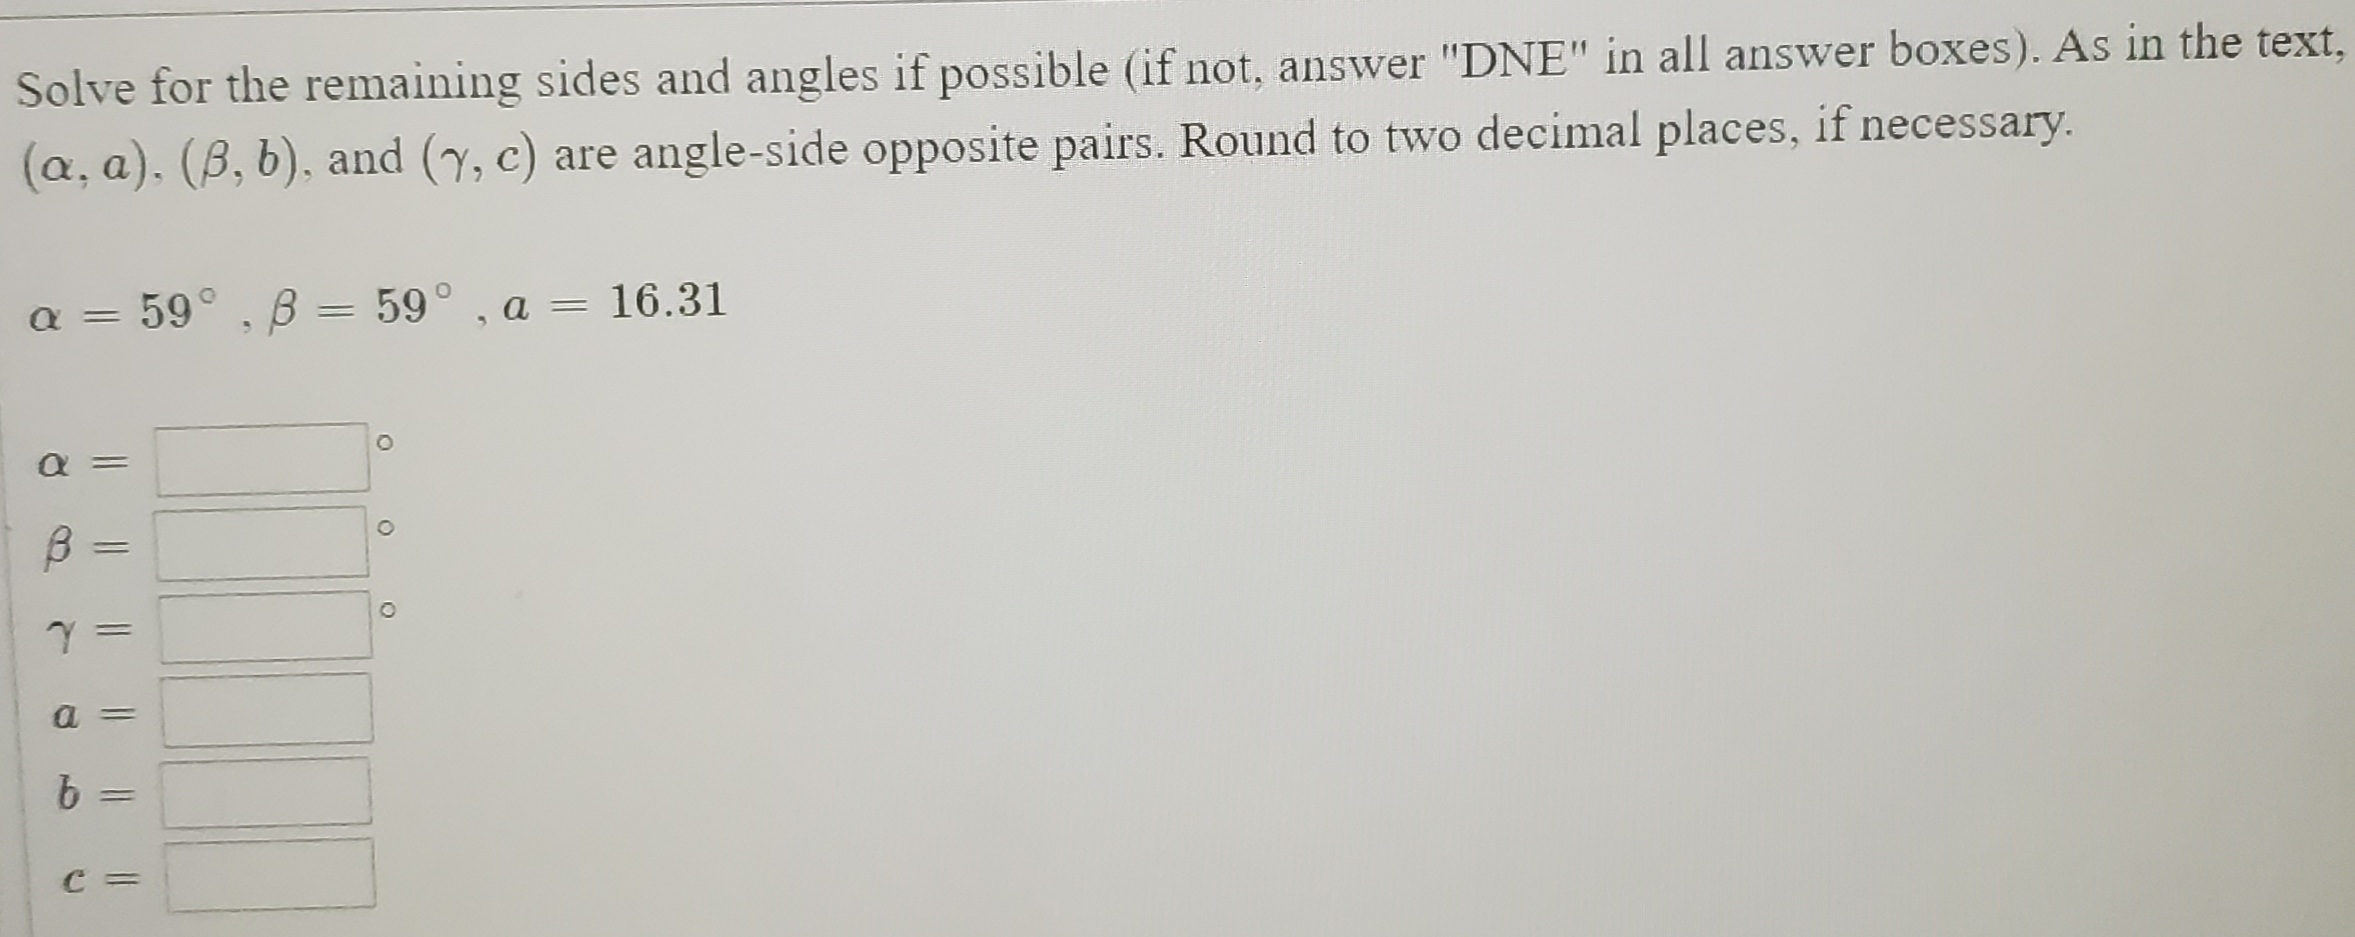 Solve for the remaining sides and angles if possible (if not, answer "DNE" in all answer boxes). As in the text.
(a, a). (B, b), and (y, c) are angle-side opposite pairs. Round to two decimal places, if necessary.
a = 59°, B = 59° , a = 16.31
||
%3D
